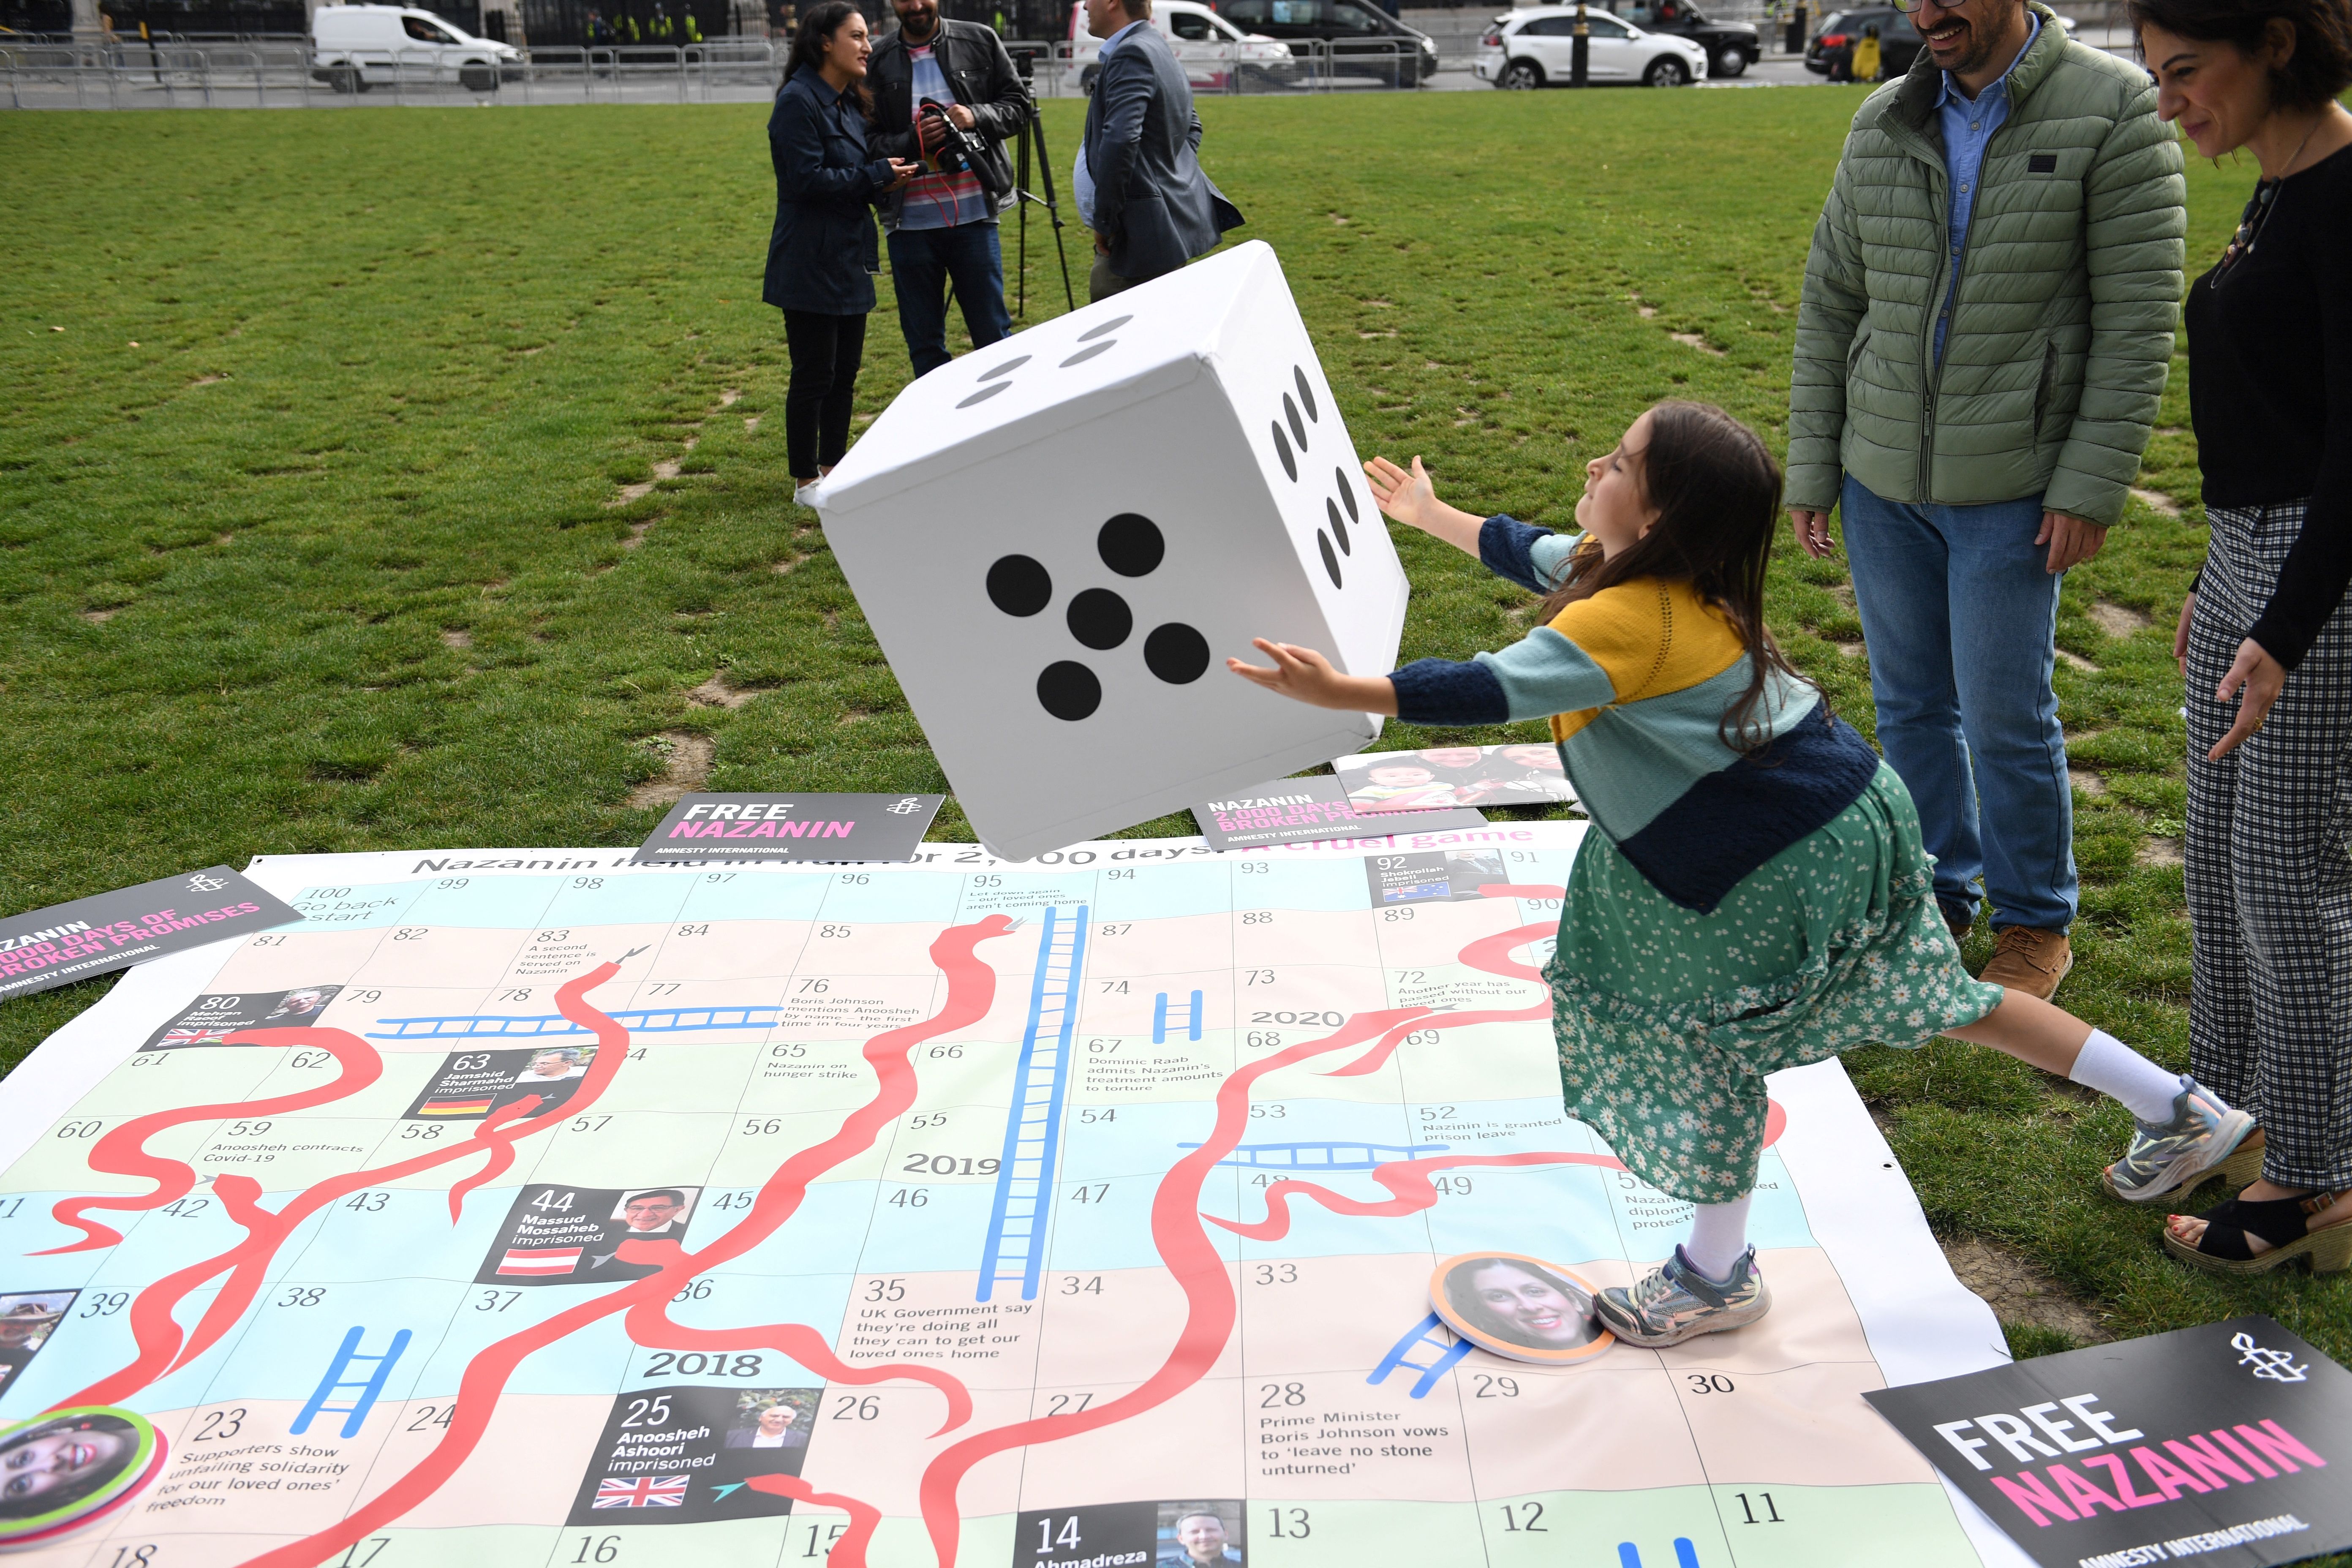 Gabriella Ratcliffe rolls a dice to play on a giant snakes and ladders board in Parliament Square, London to mark the 2,000th day of her mother’s detention in Iran